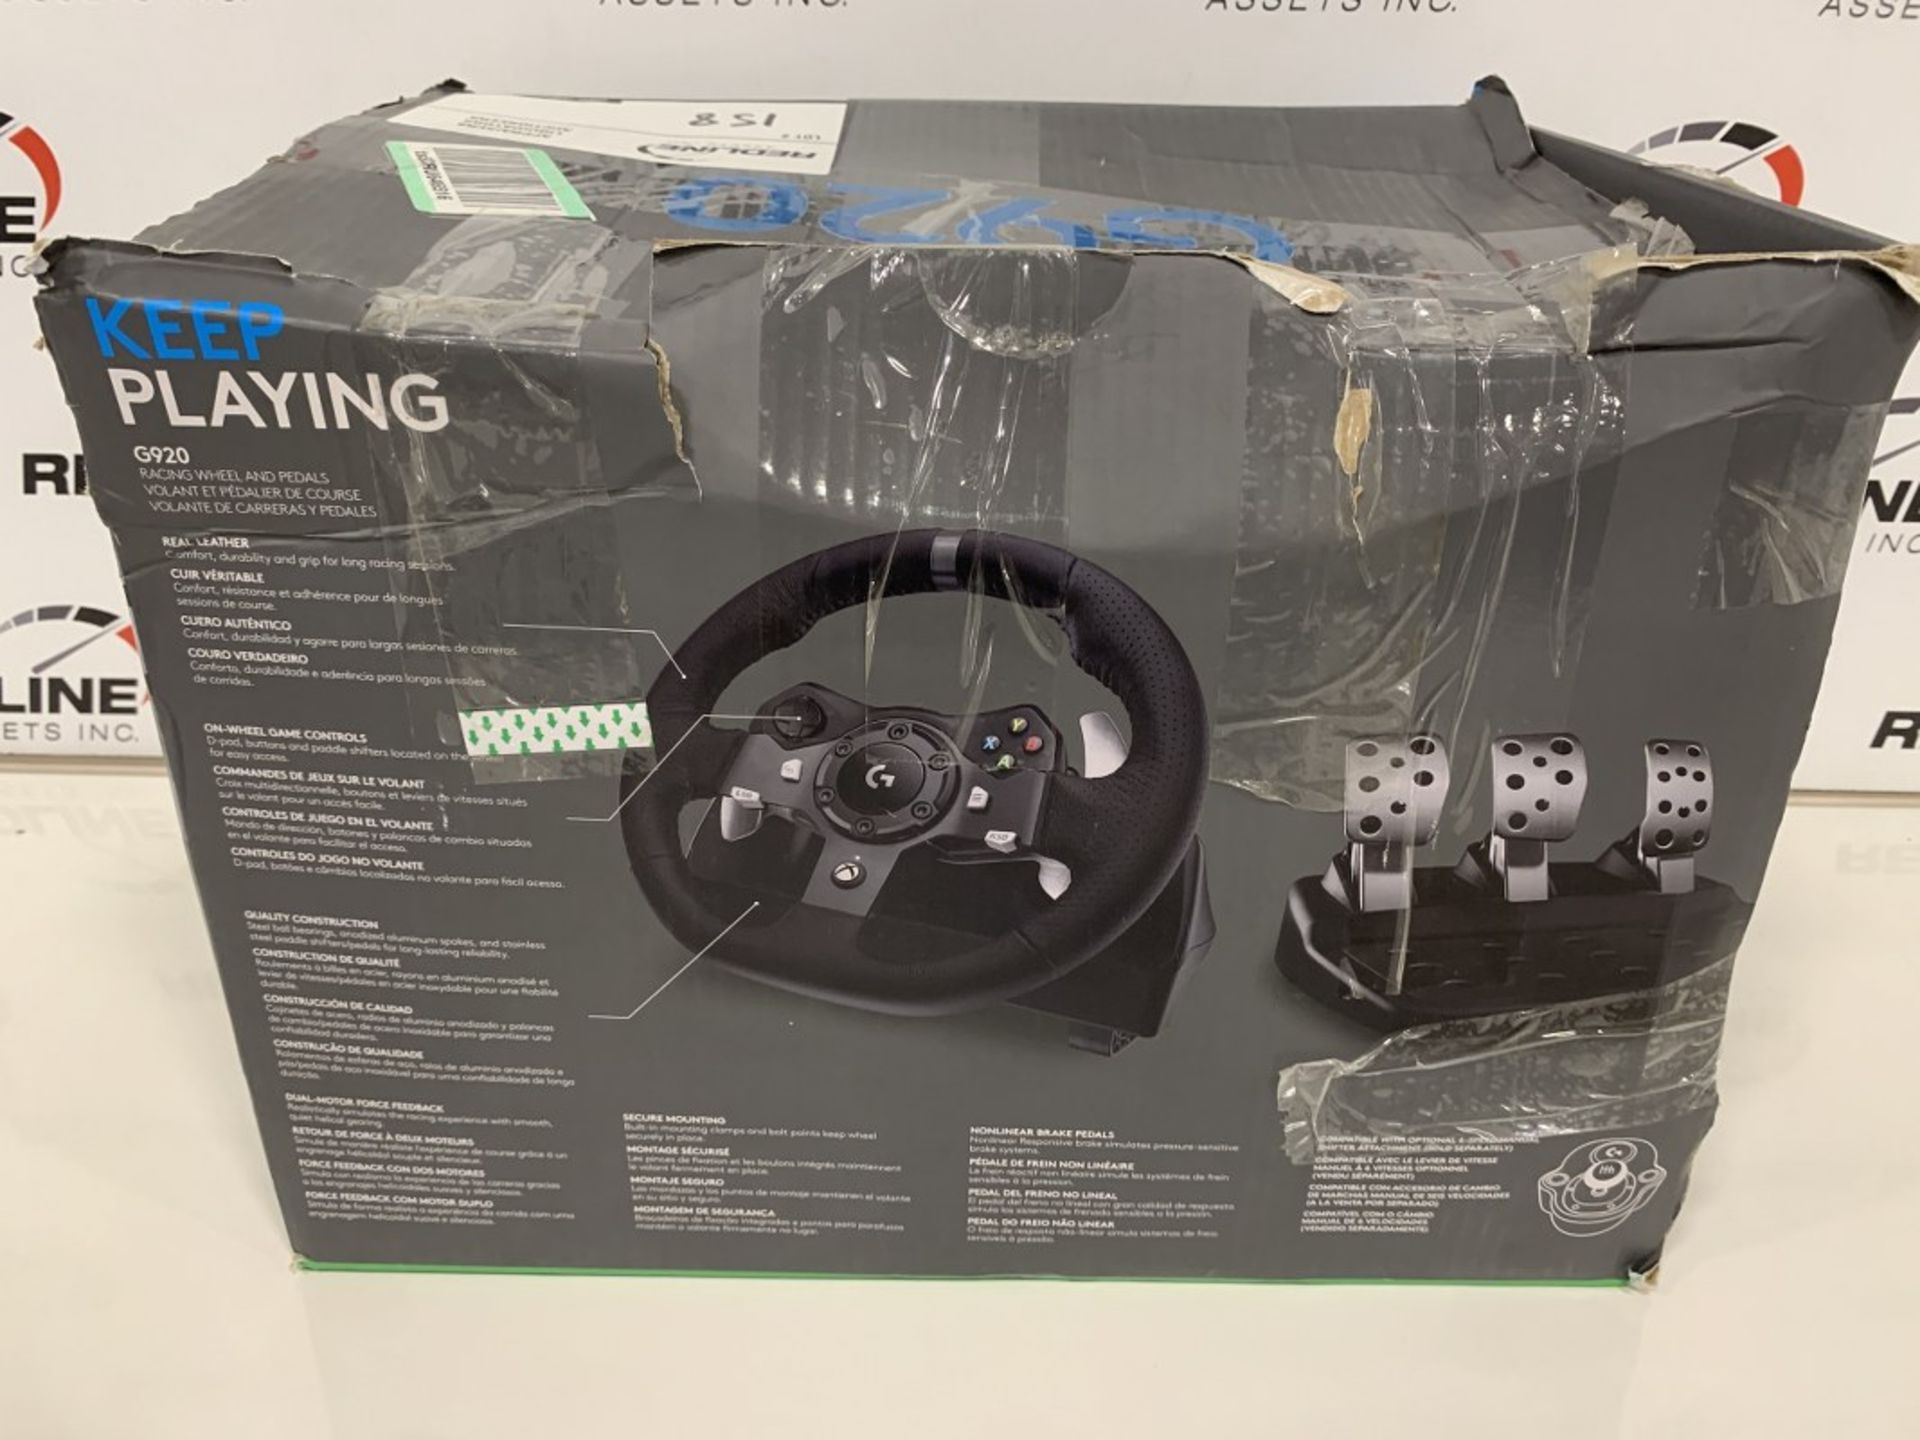 LOGITECH - G920 XBOX RACING WHEEL AND PEDALS - Image 2 of 2